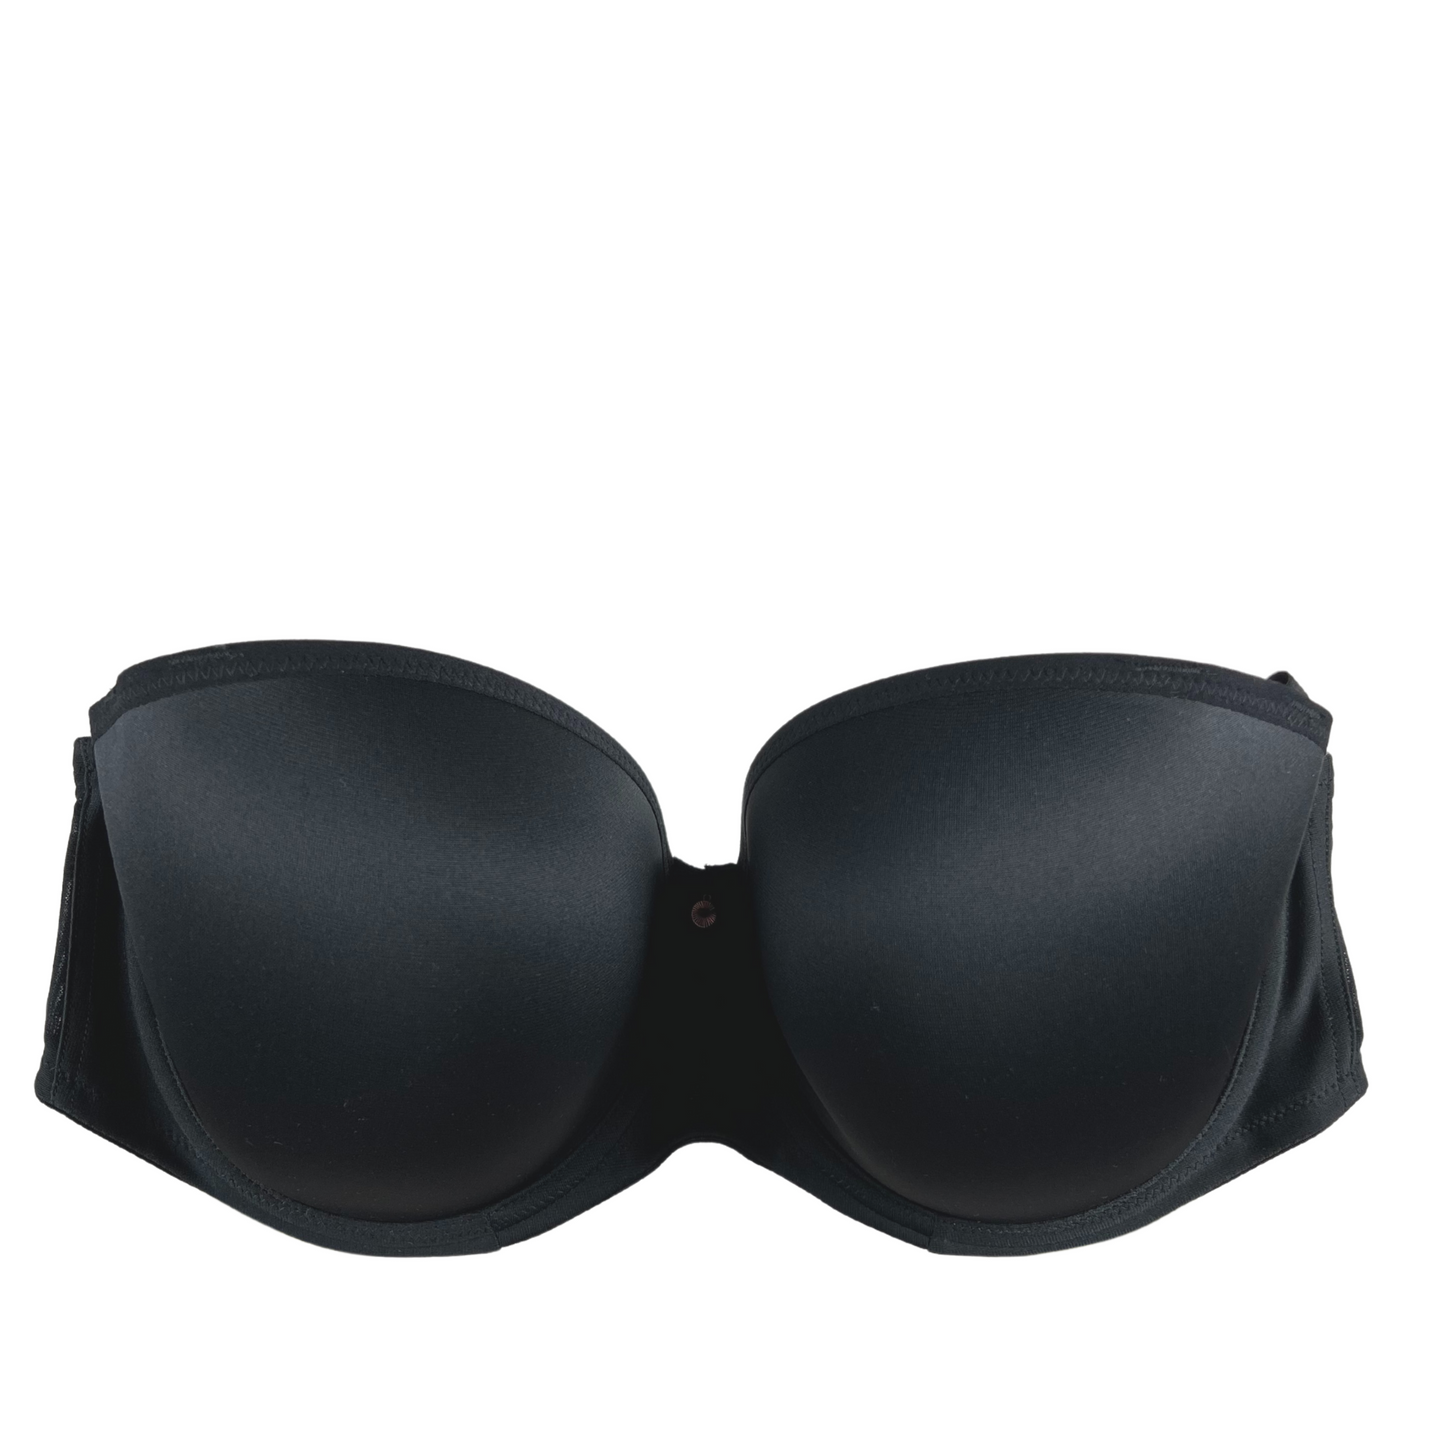 Elomi Smooth Underwire Molded Strapless Bra in Black - Busted Bra Shop